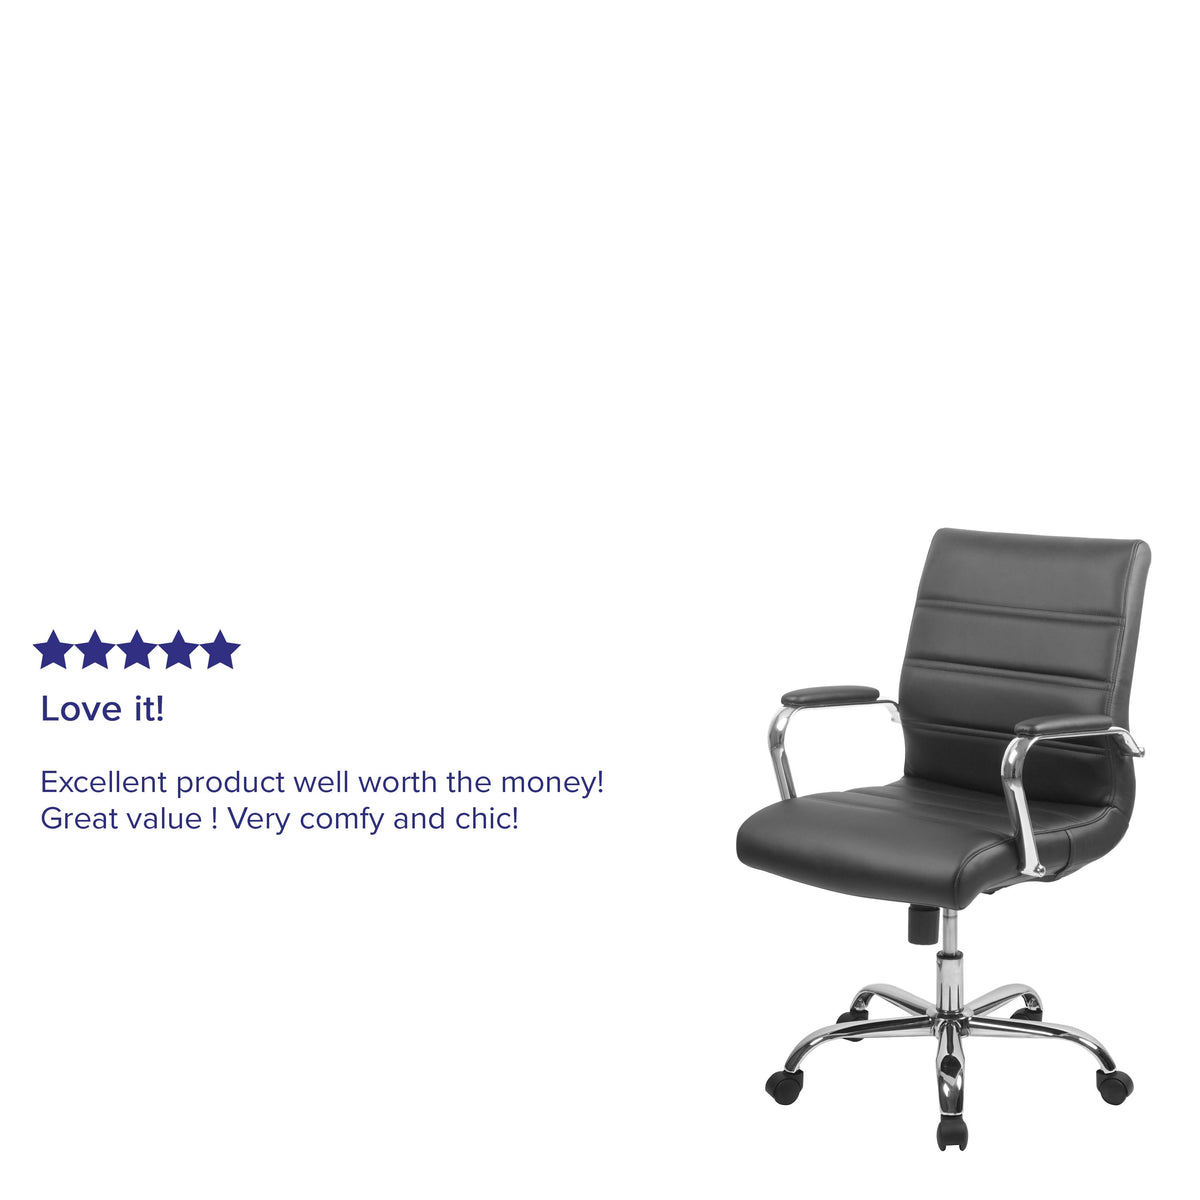 Black LeatherSoft/Chrome Frame |#| Mid-Back Black LeatherSoft Executive Swivel Office Chair with Chrome Frame/Arms